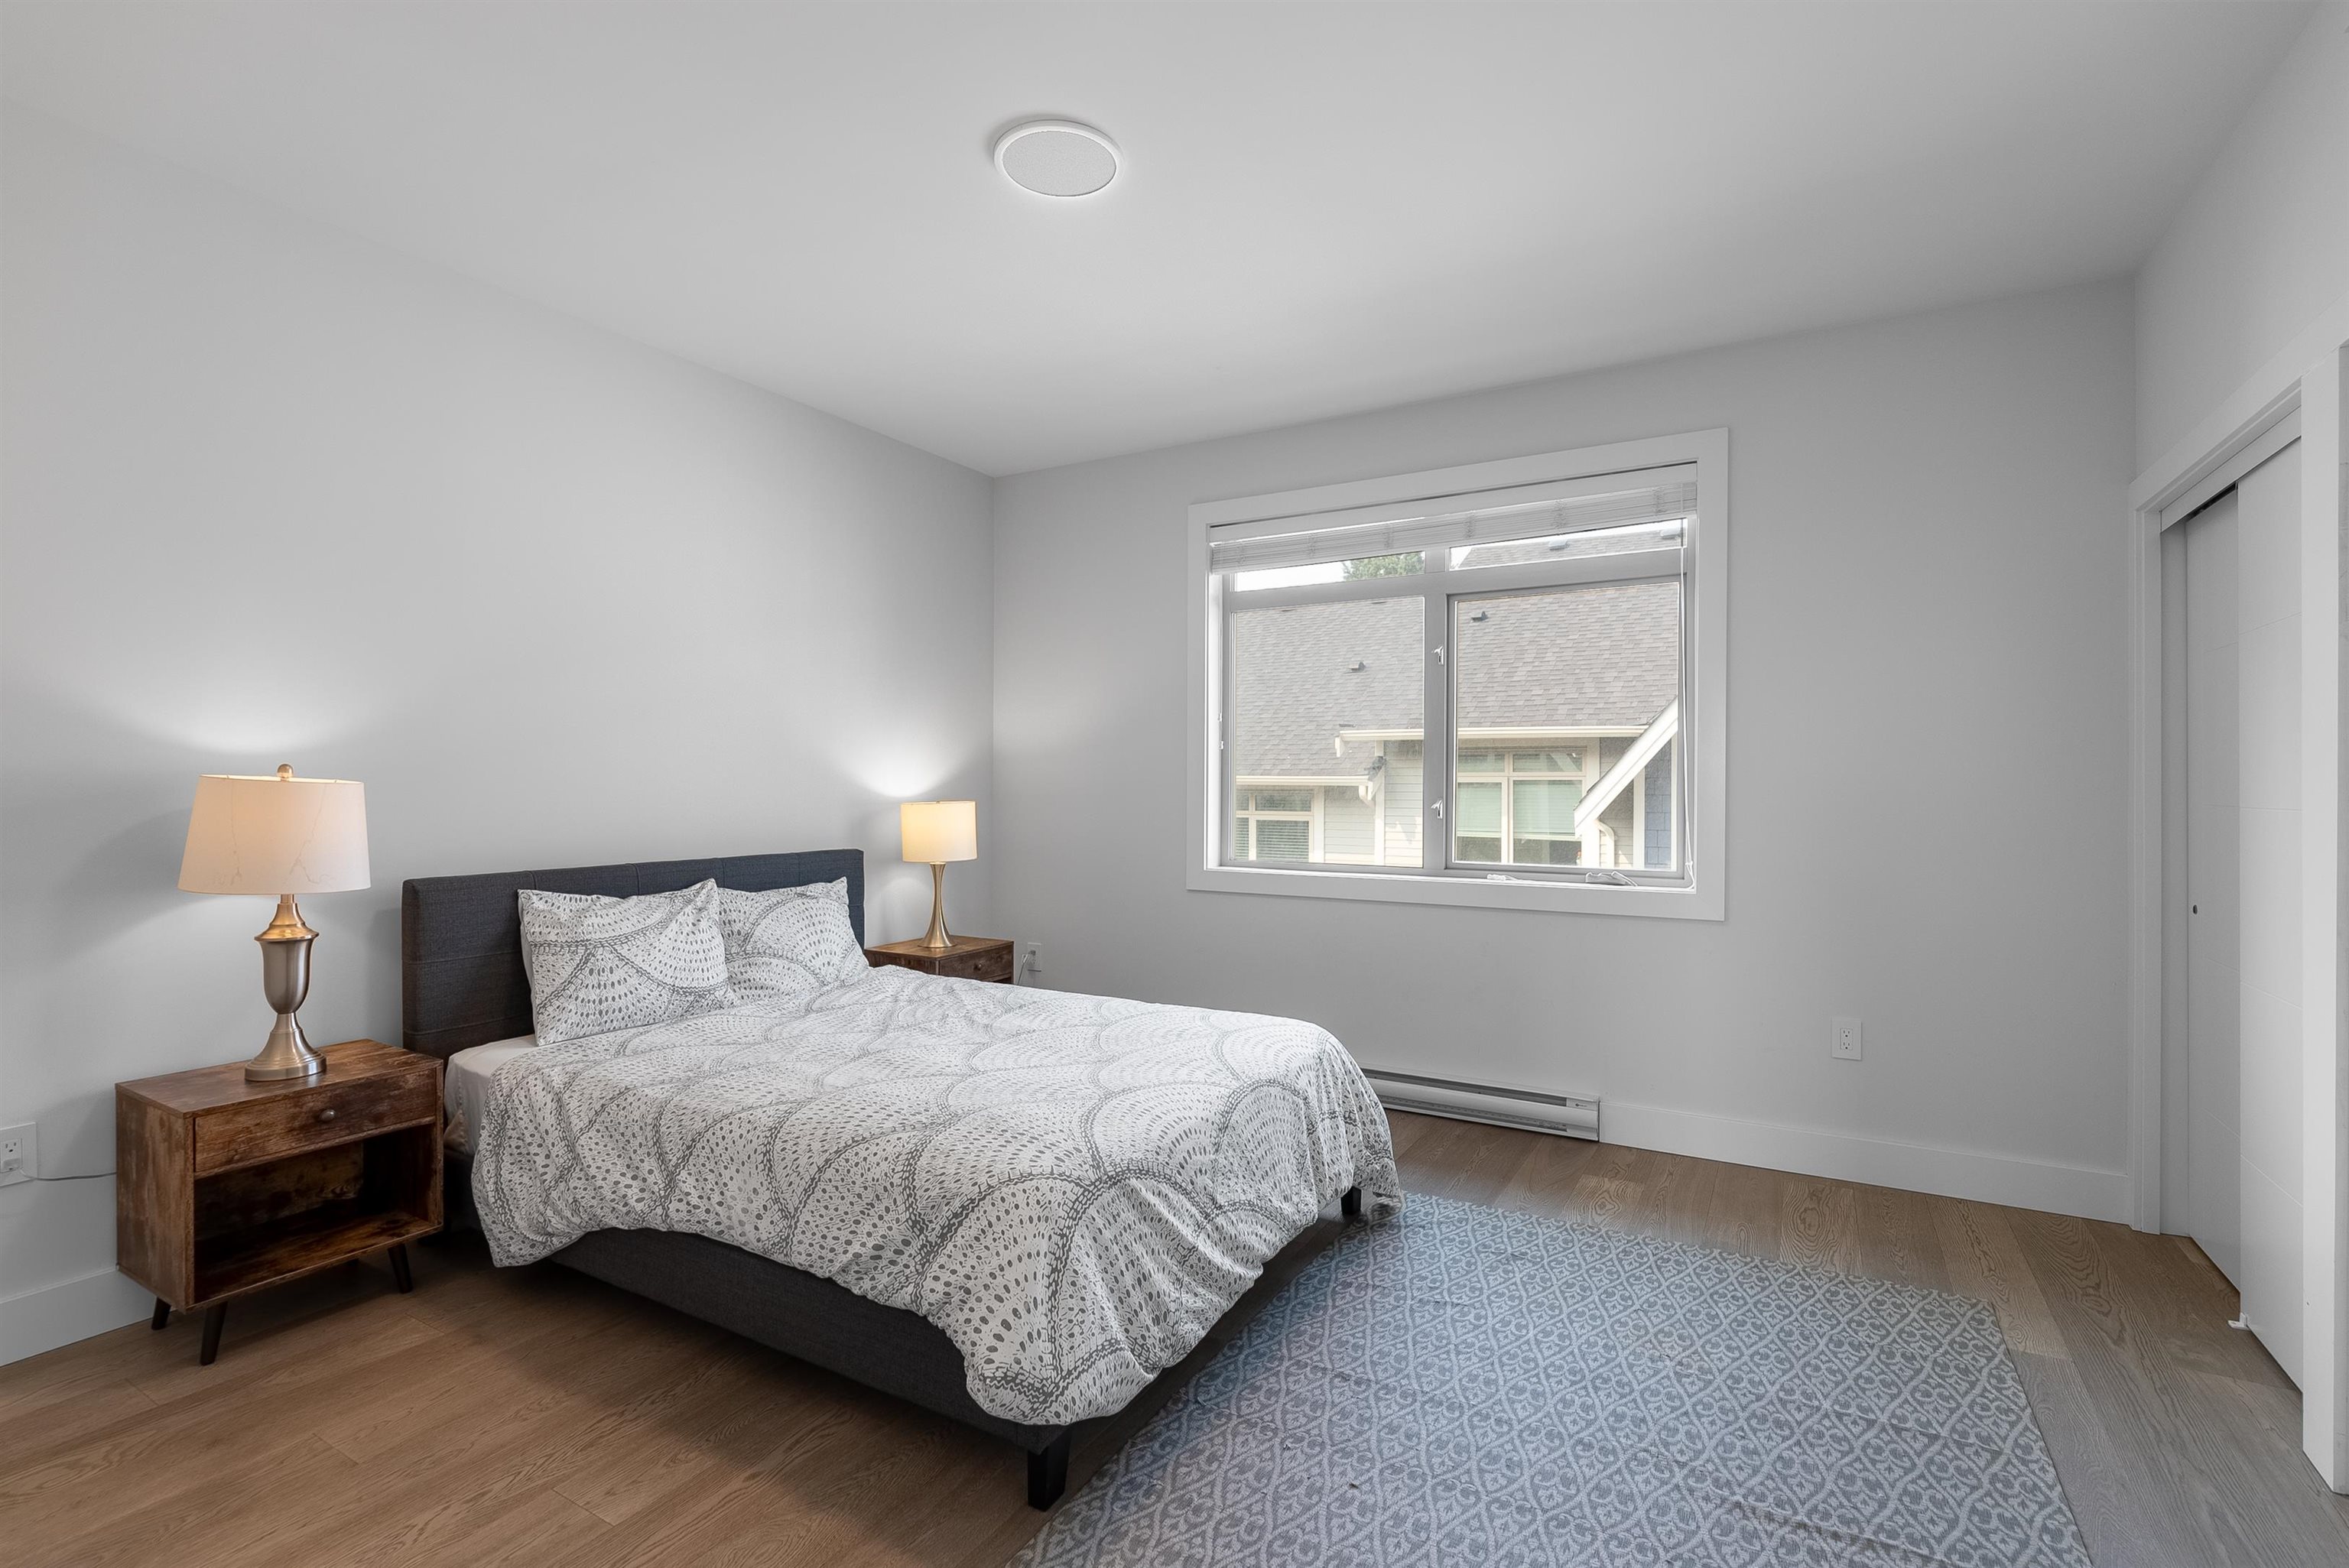 Listing image of 11 115 W QUEENS ROAD